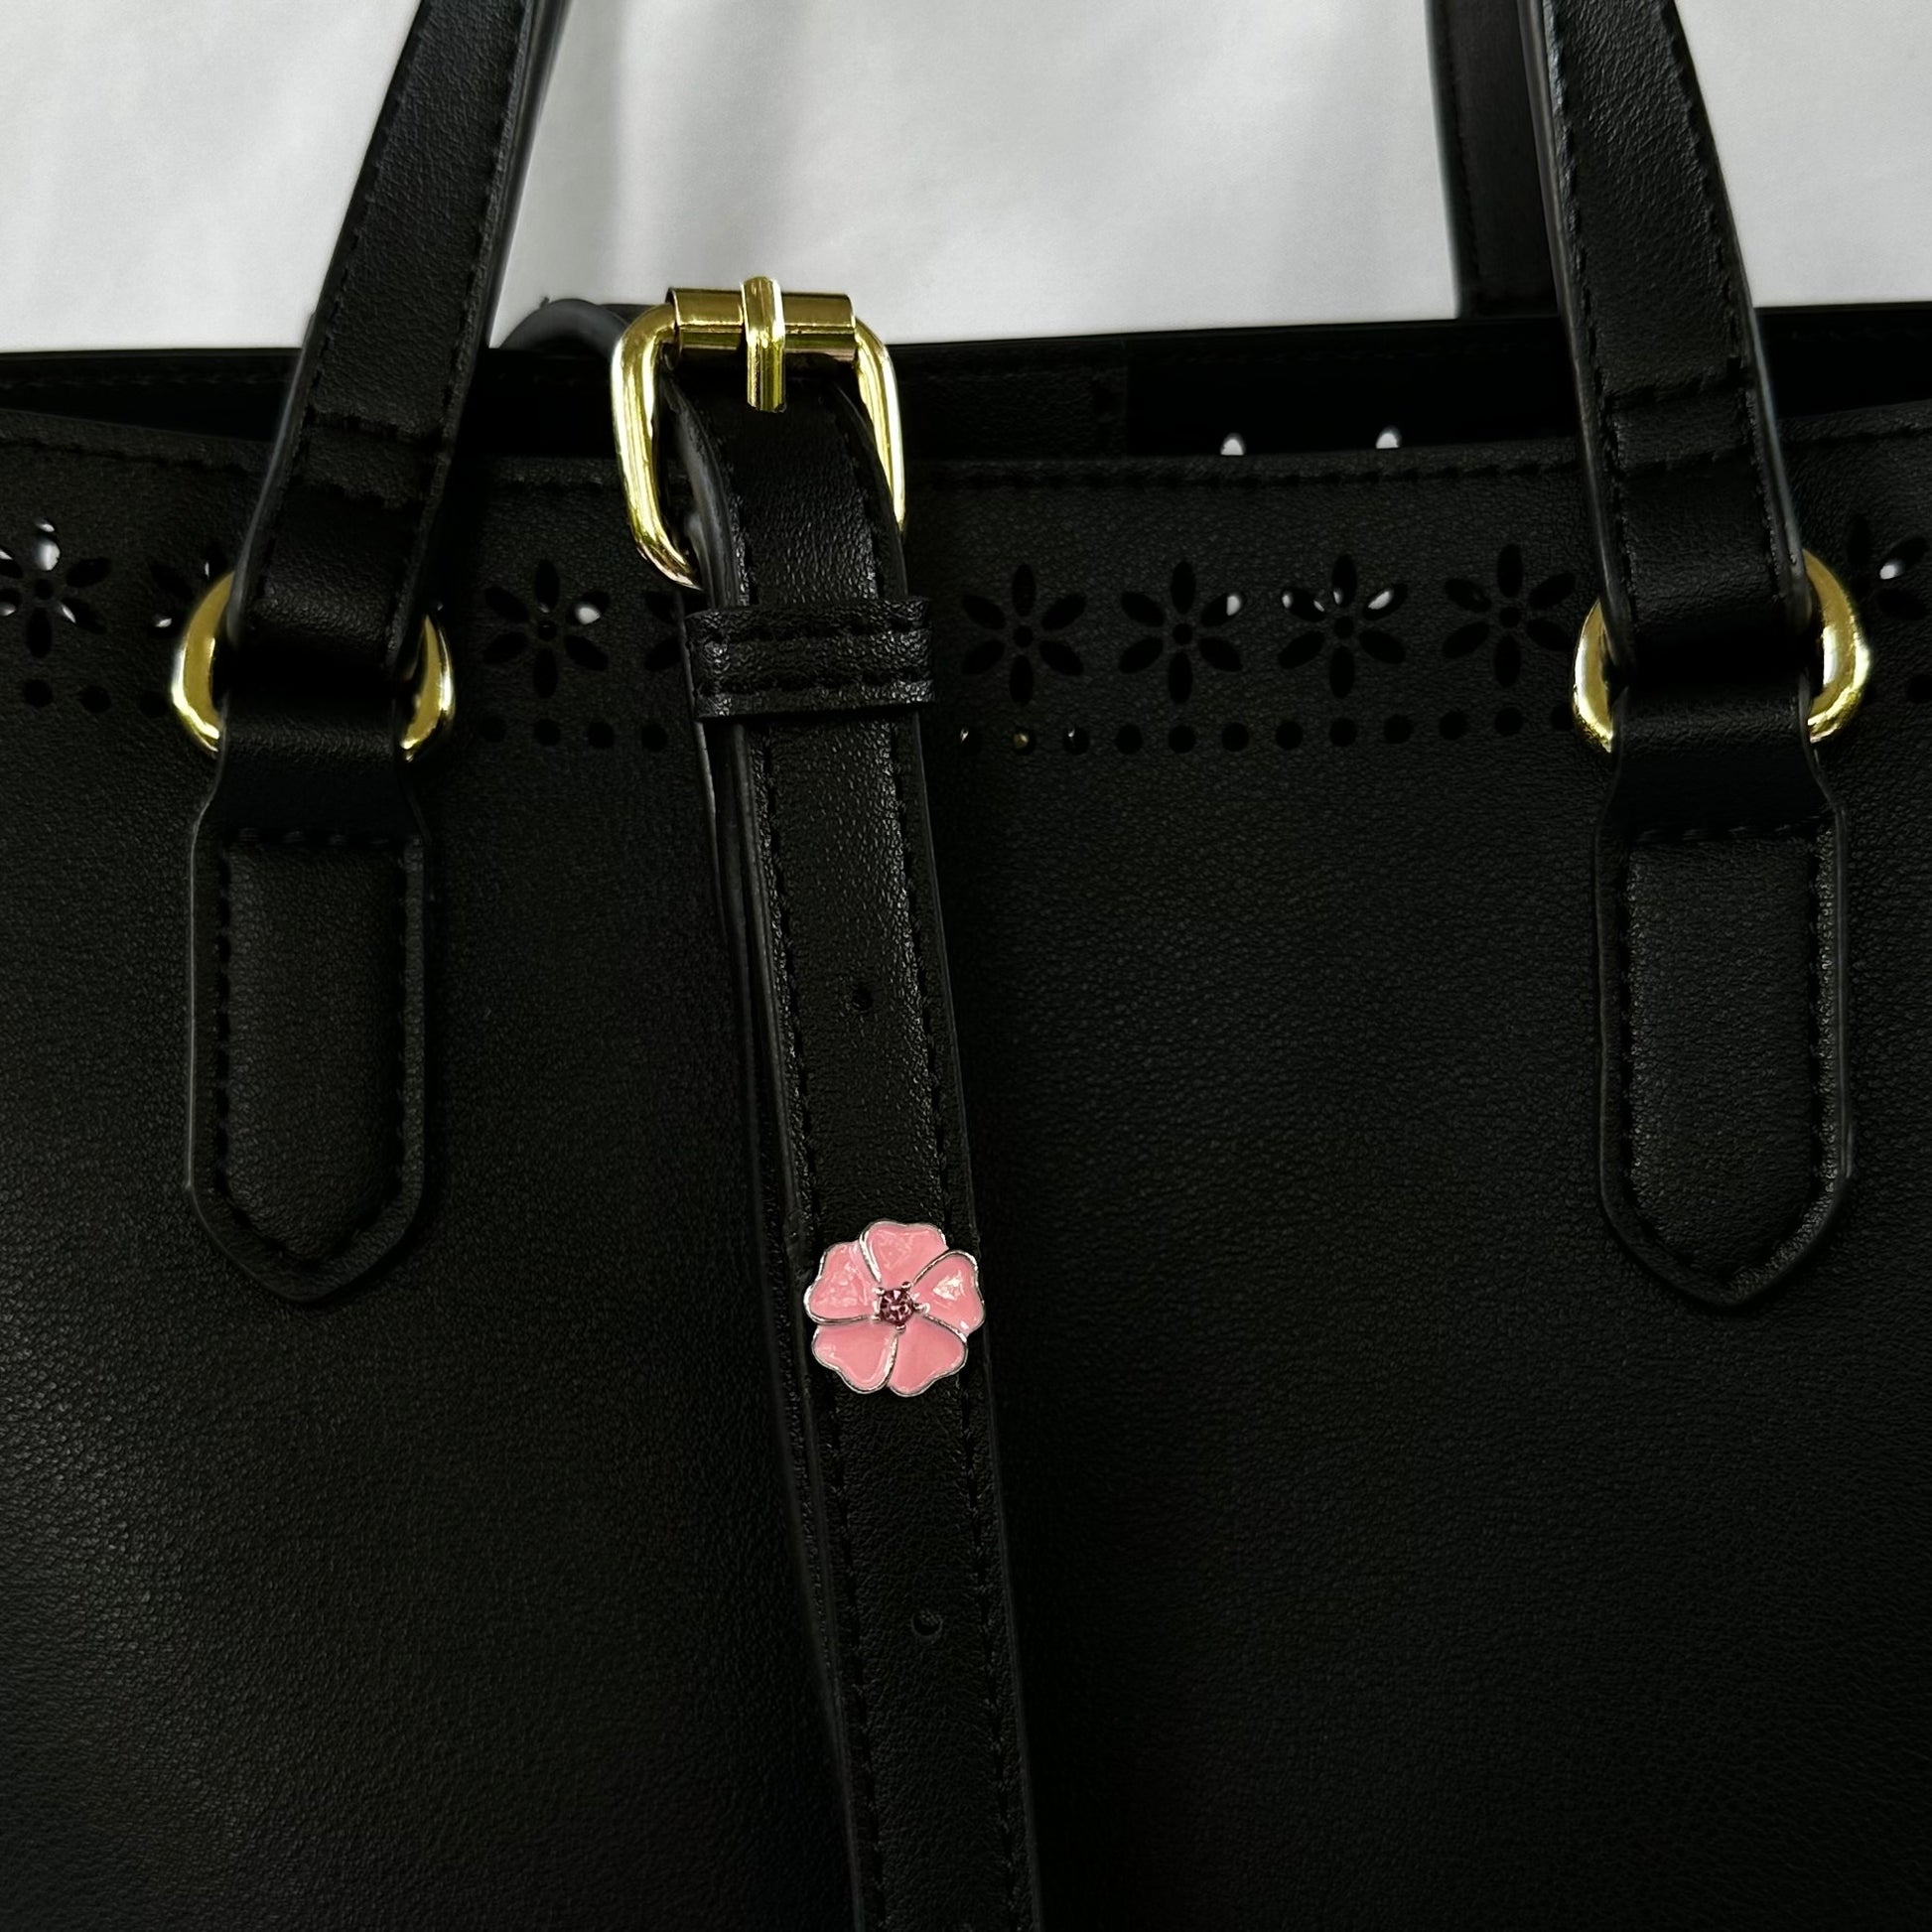 Pink Flower Belt, Bag and Watch Band Charm